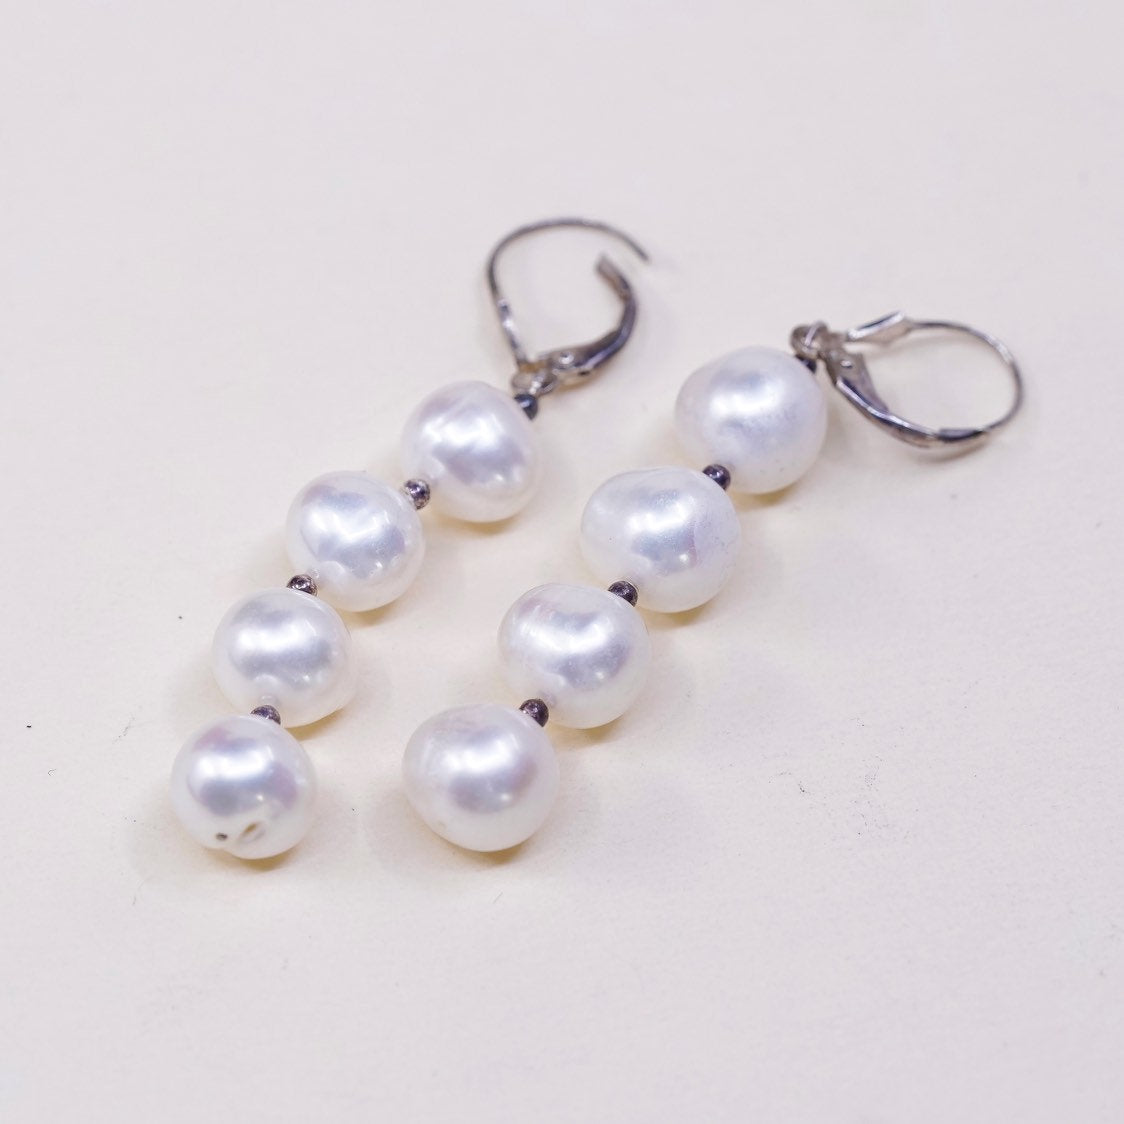 vtg Sterling silver handmade earrings, 925 hooks with pearl drops, stamped 925